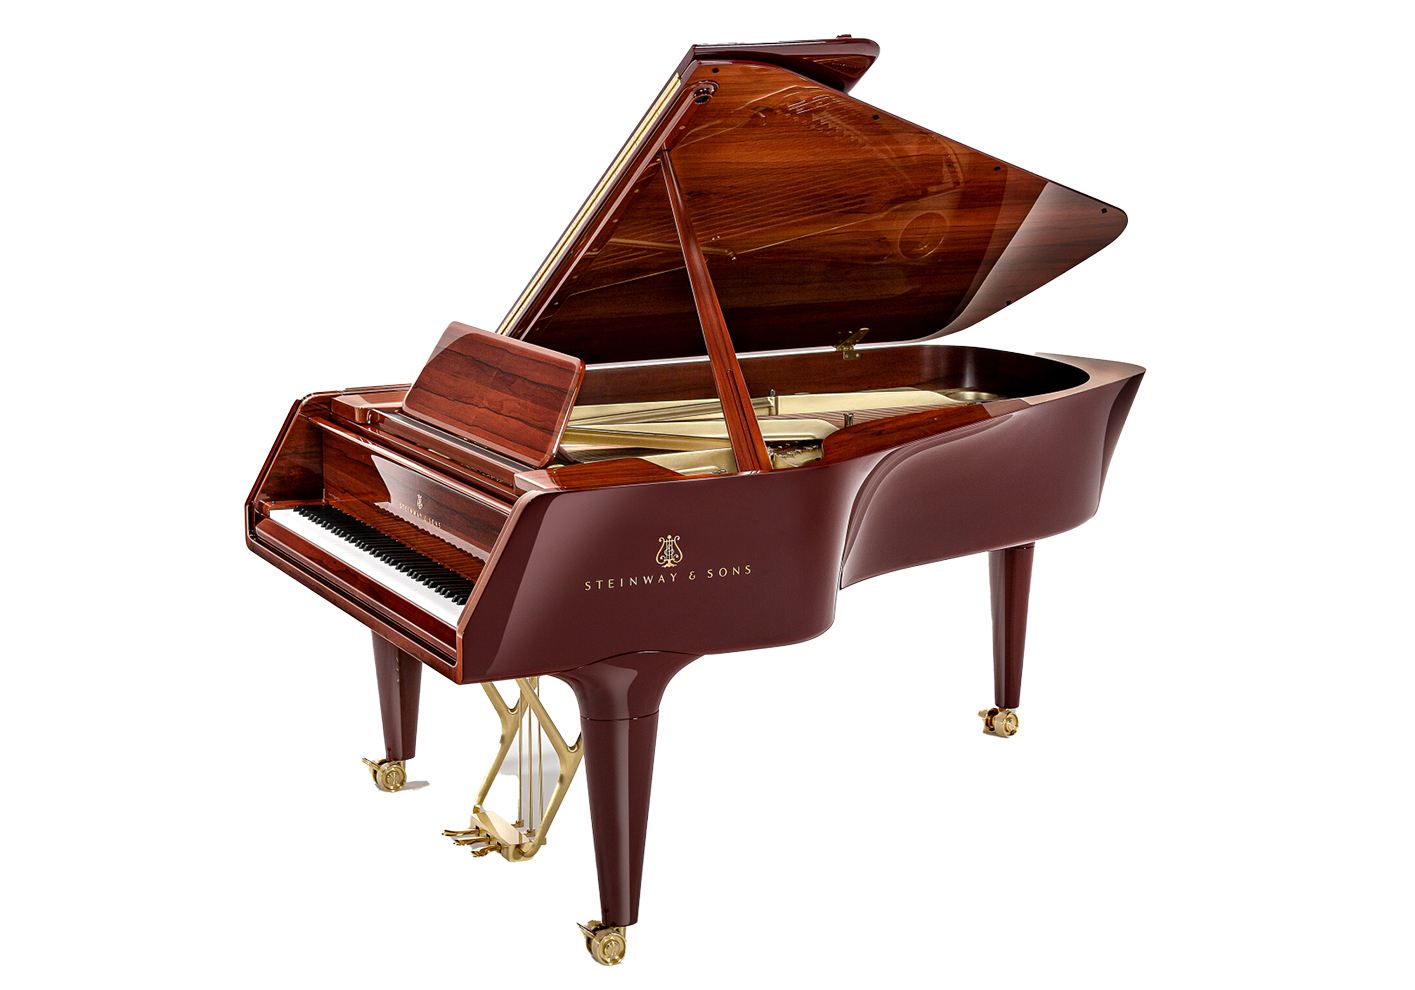 The Steinway & Sons Noé Limited Edition